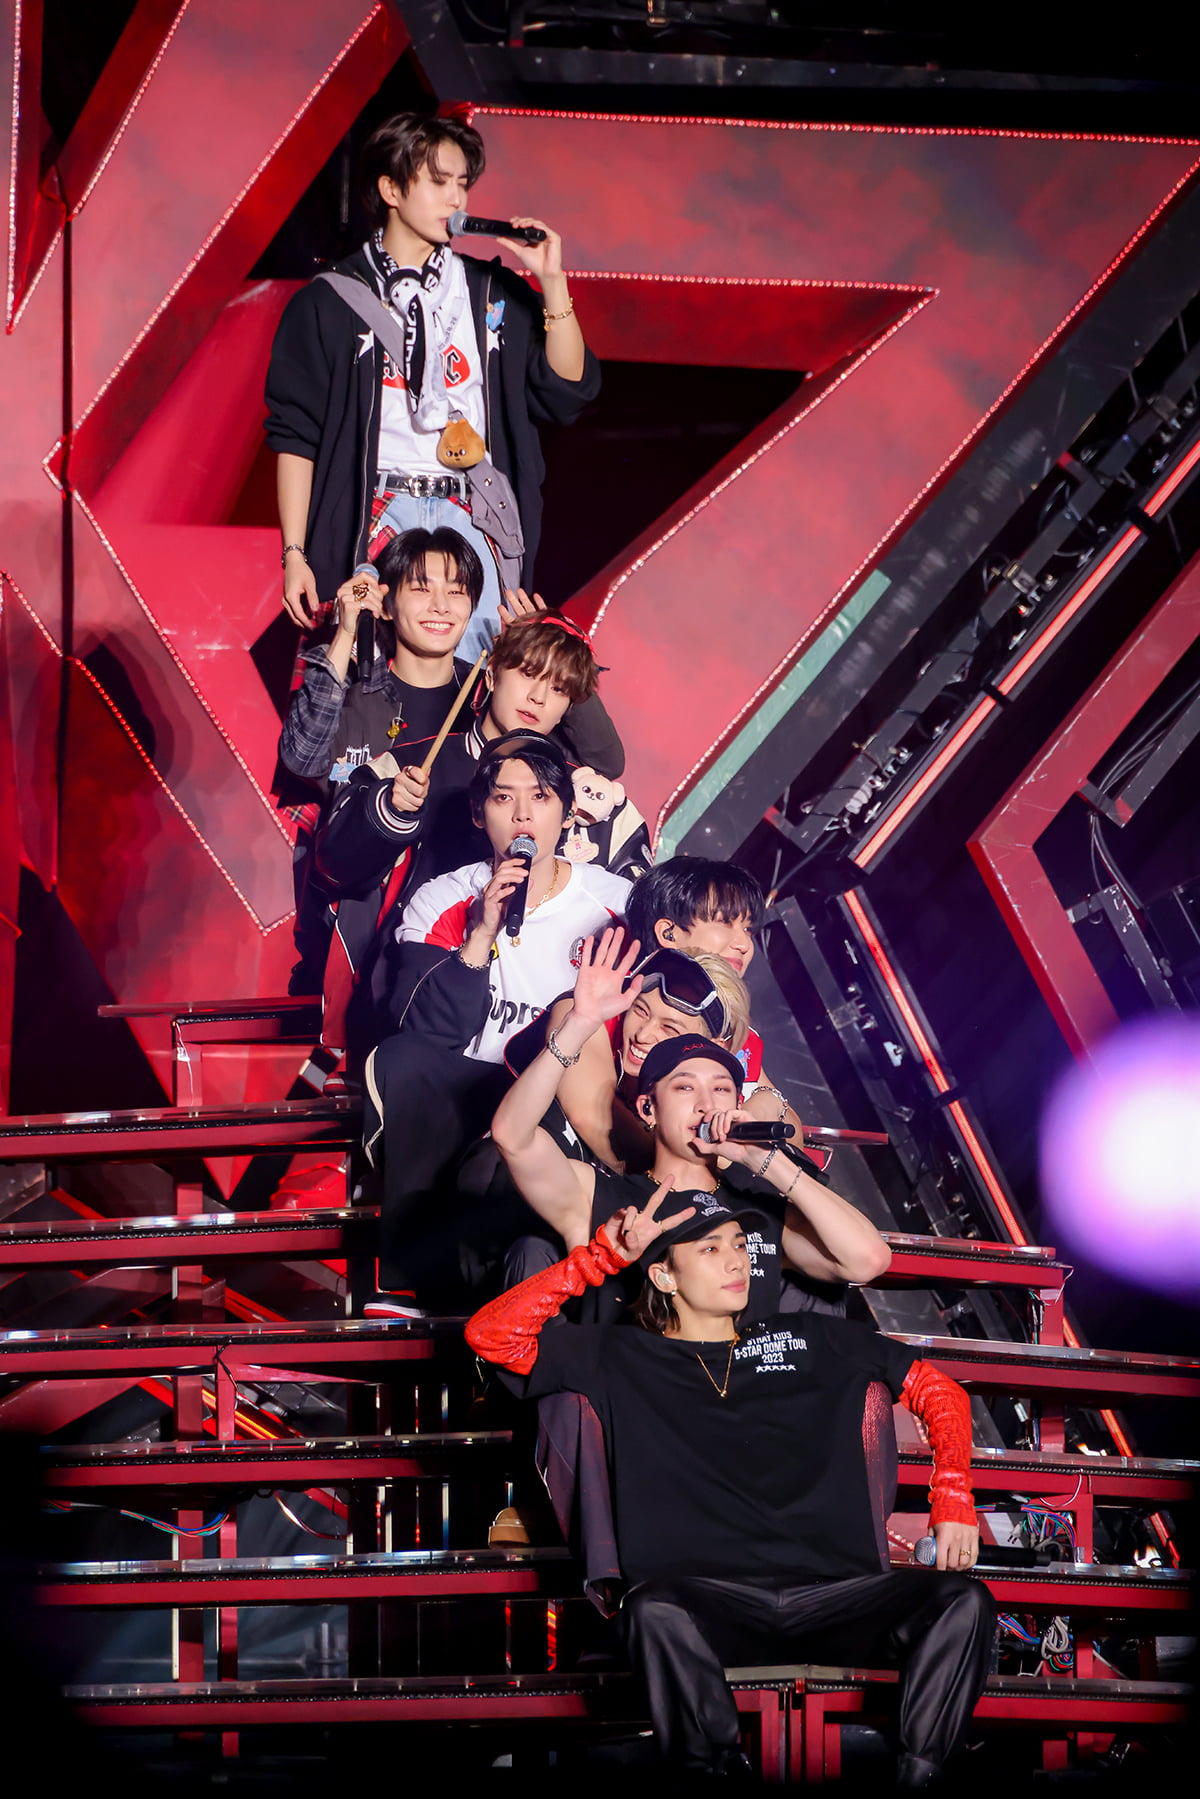 Stray Kids shines with unrivaled presence at night at Tokyo Dome